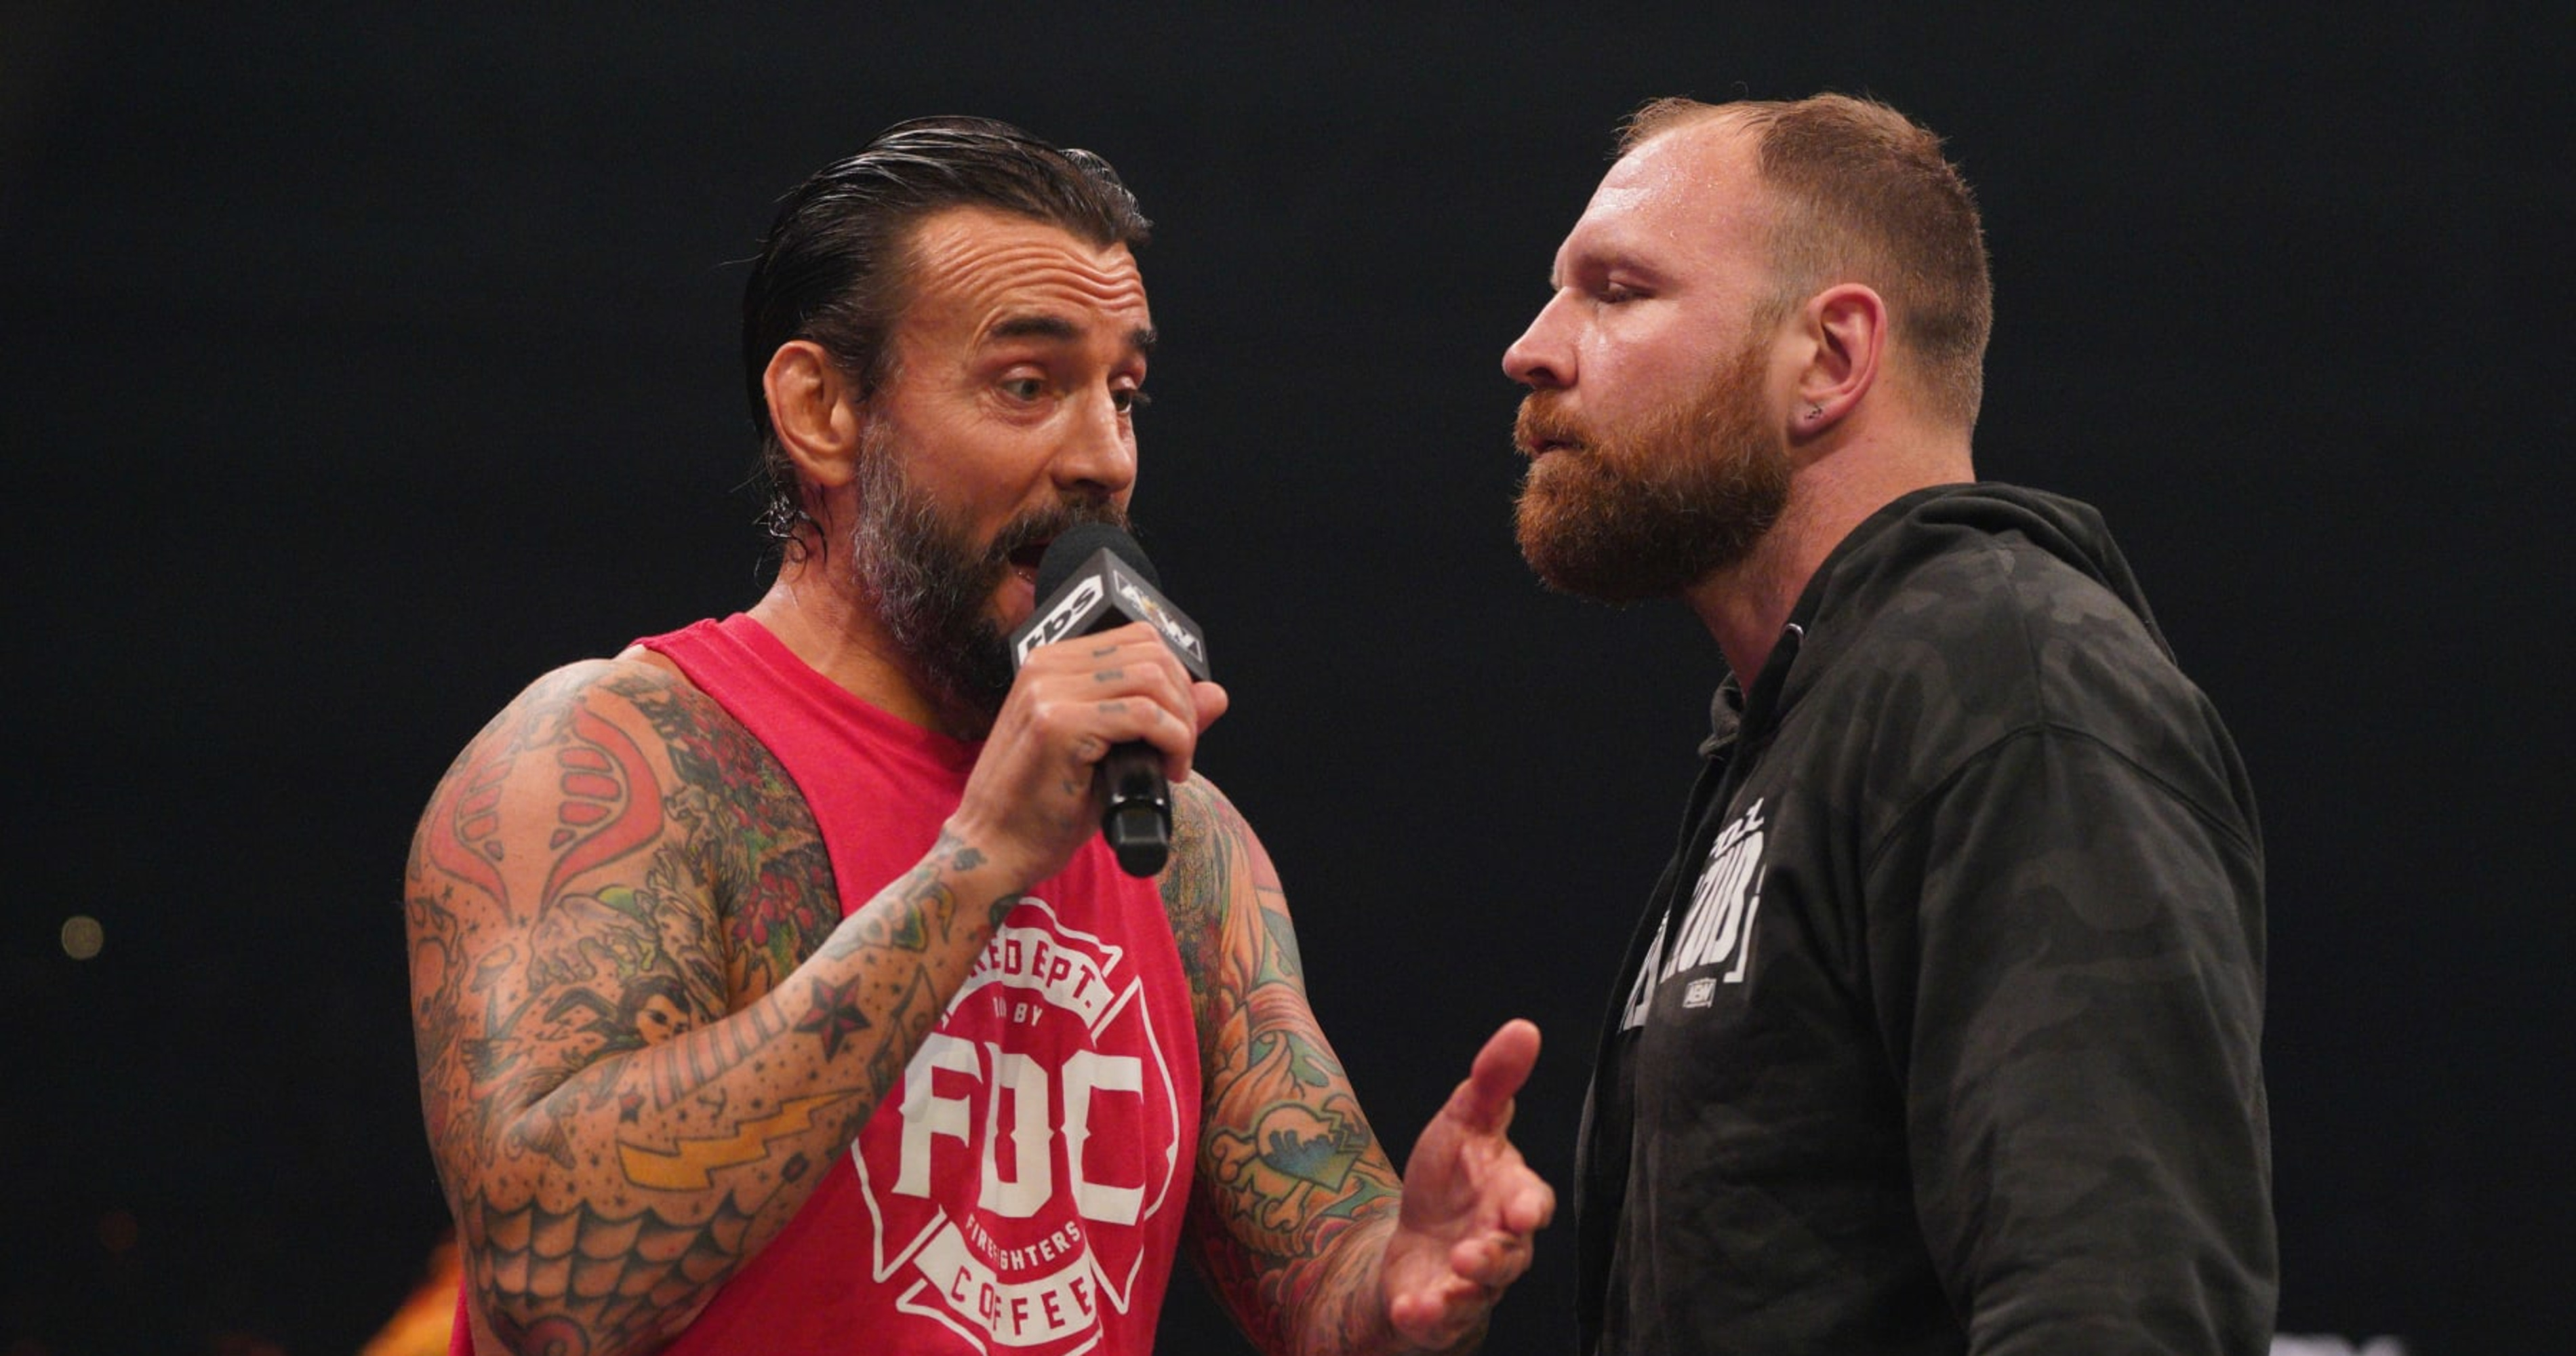 Backstage WWE and AEW Rumors: Latest on CM Punk vs. Jon Moxley, Theory and More thumbnail